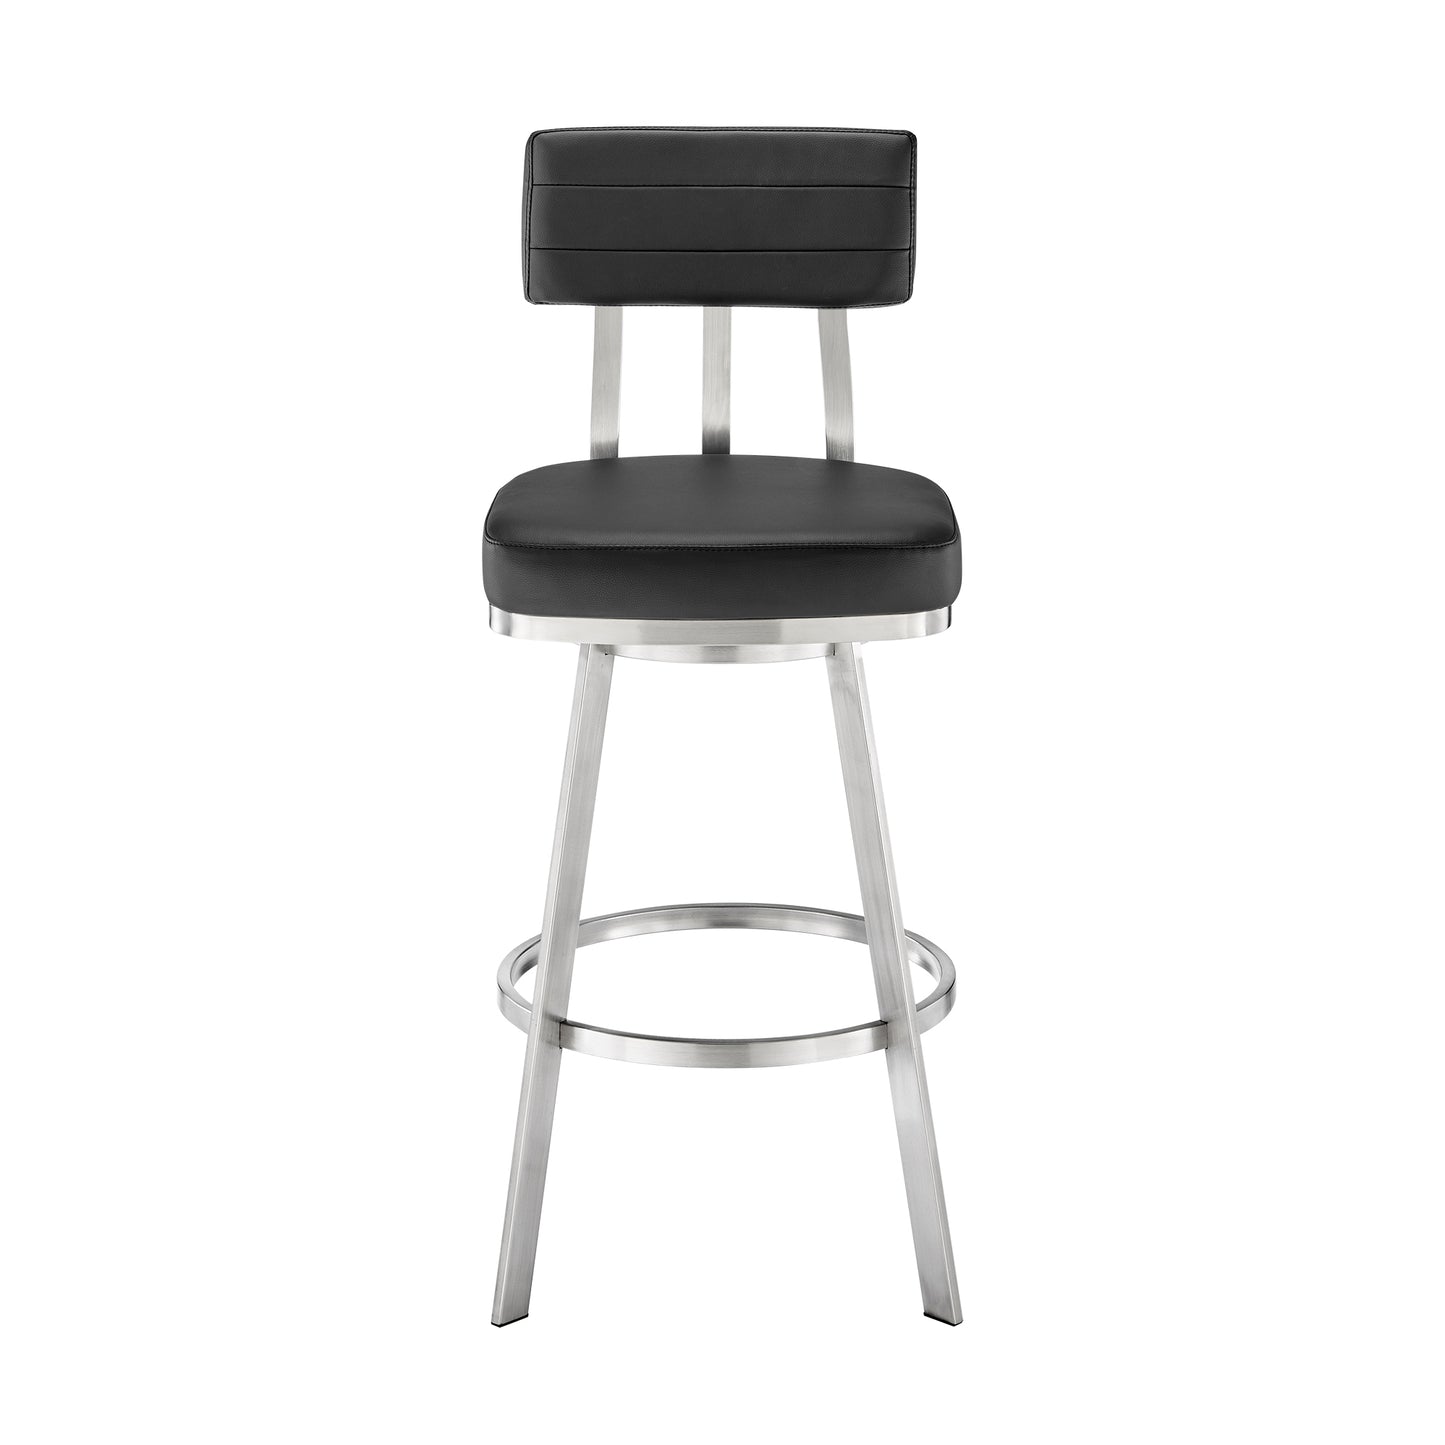 Benjamin 30" Swivel Bar Stool in Brushed Stainless Steel with Black Faux Leather